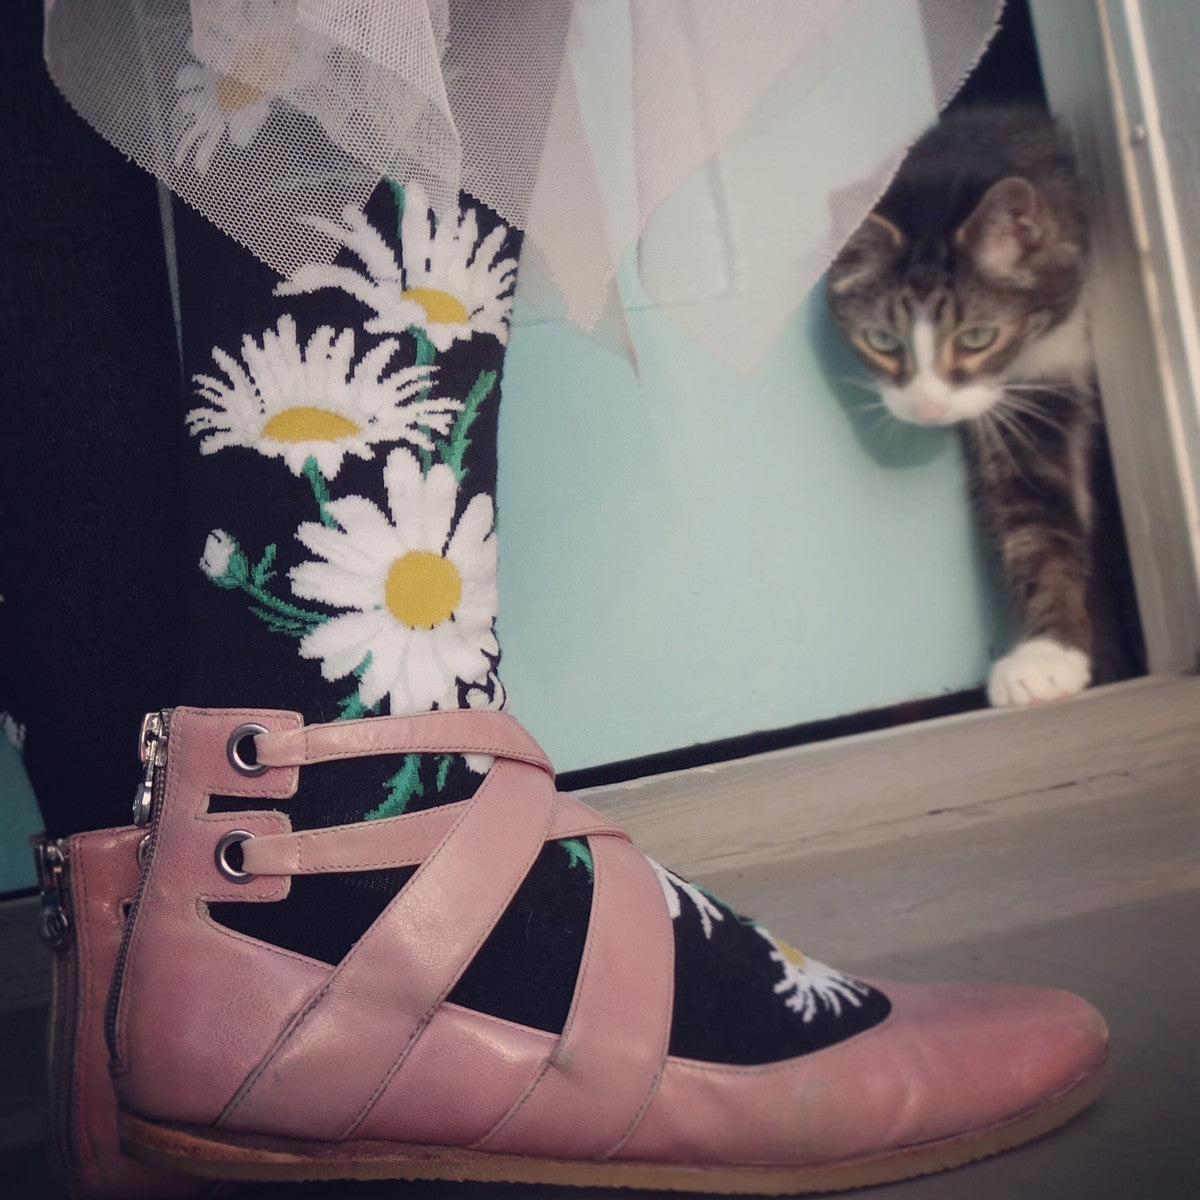 A cat looks at the beautiful floral socks his owner wears, which are adorned with daisy flowers on a black background.